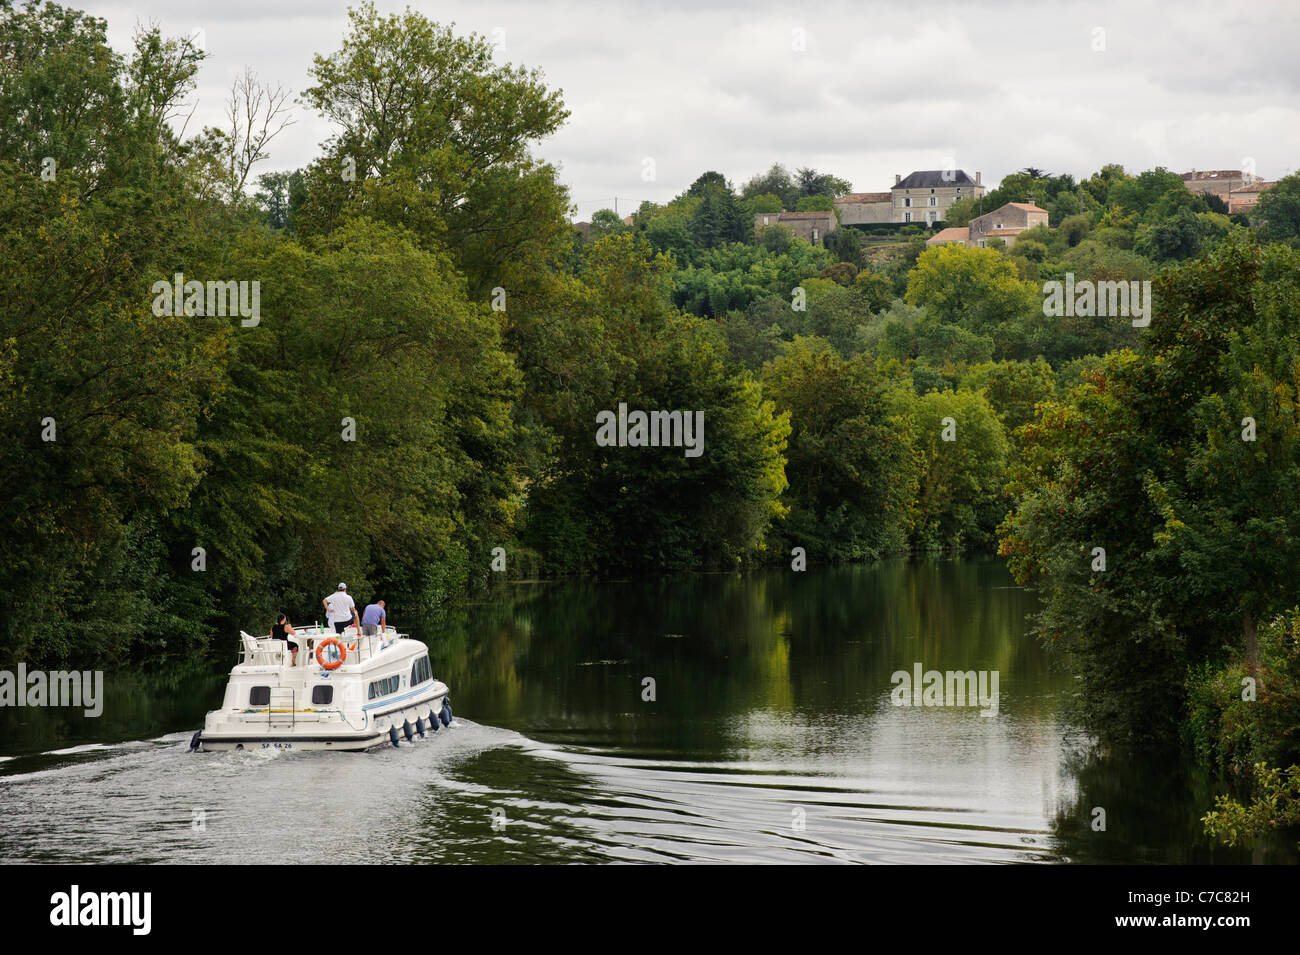 Tourist boat on the Charente river, Charente departement, France Stock Photo